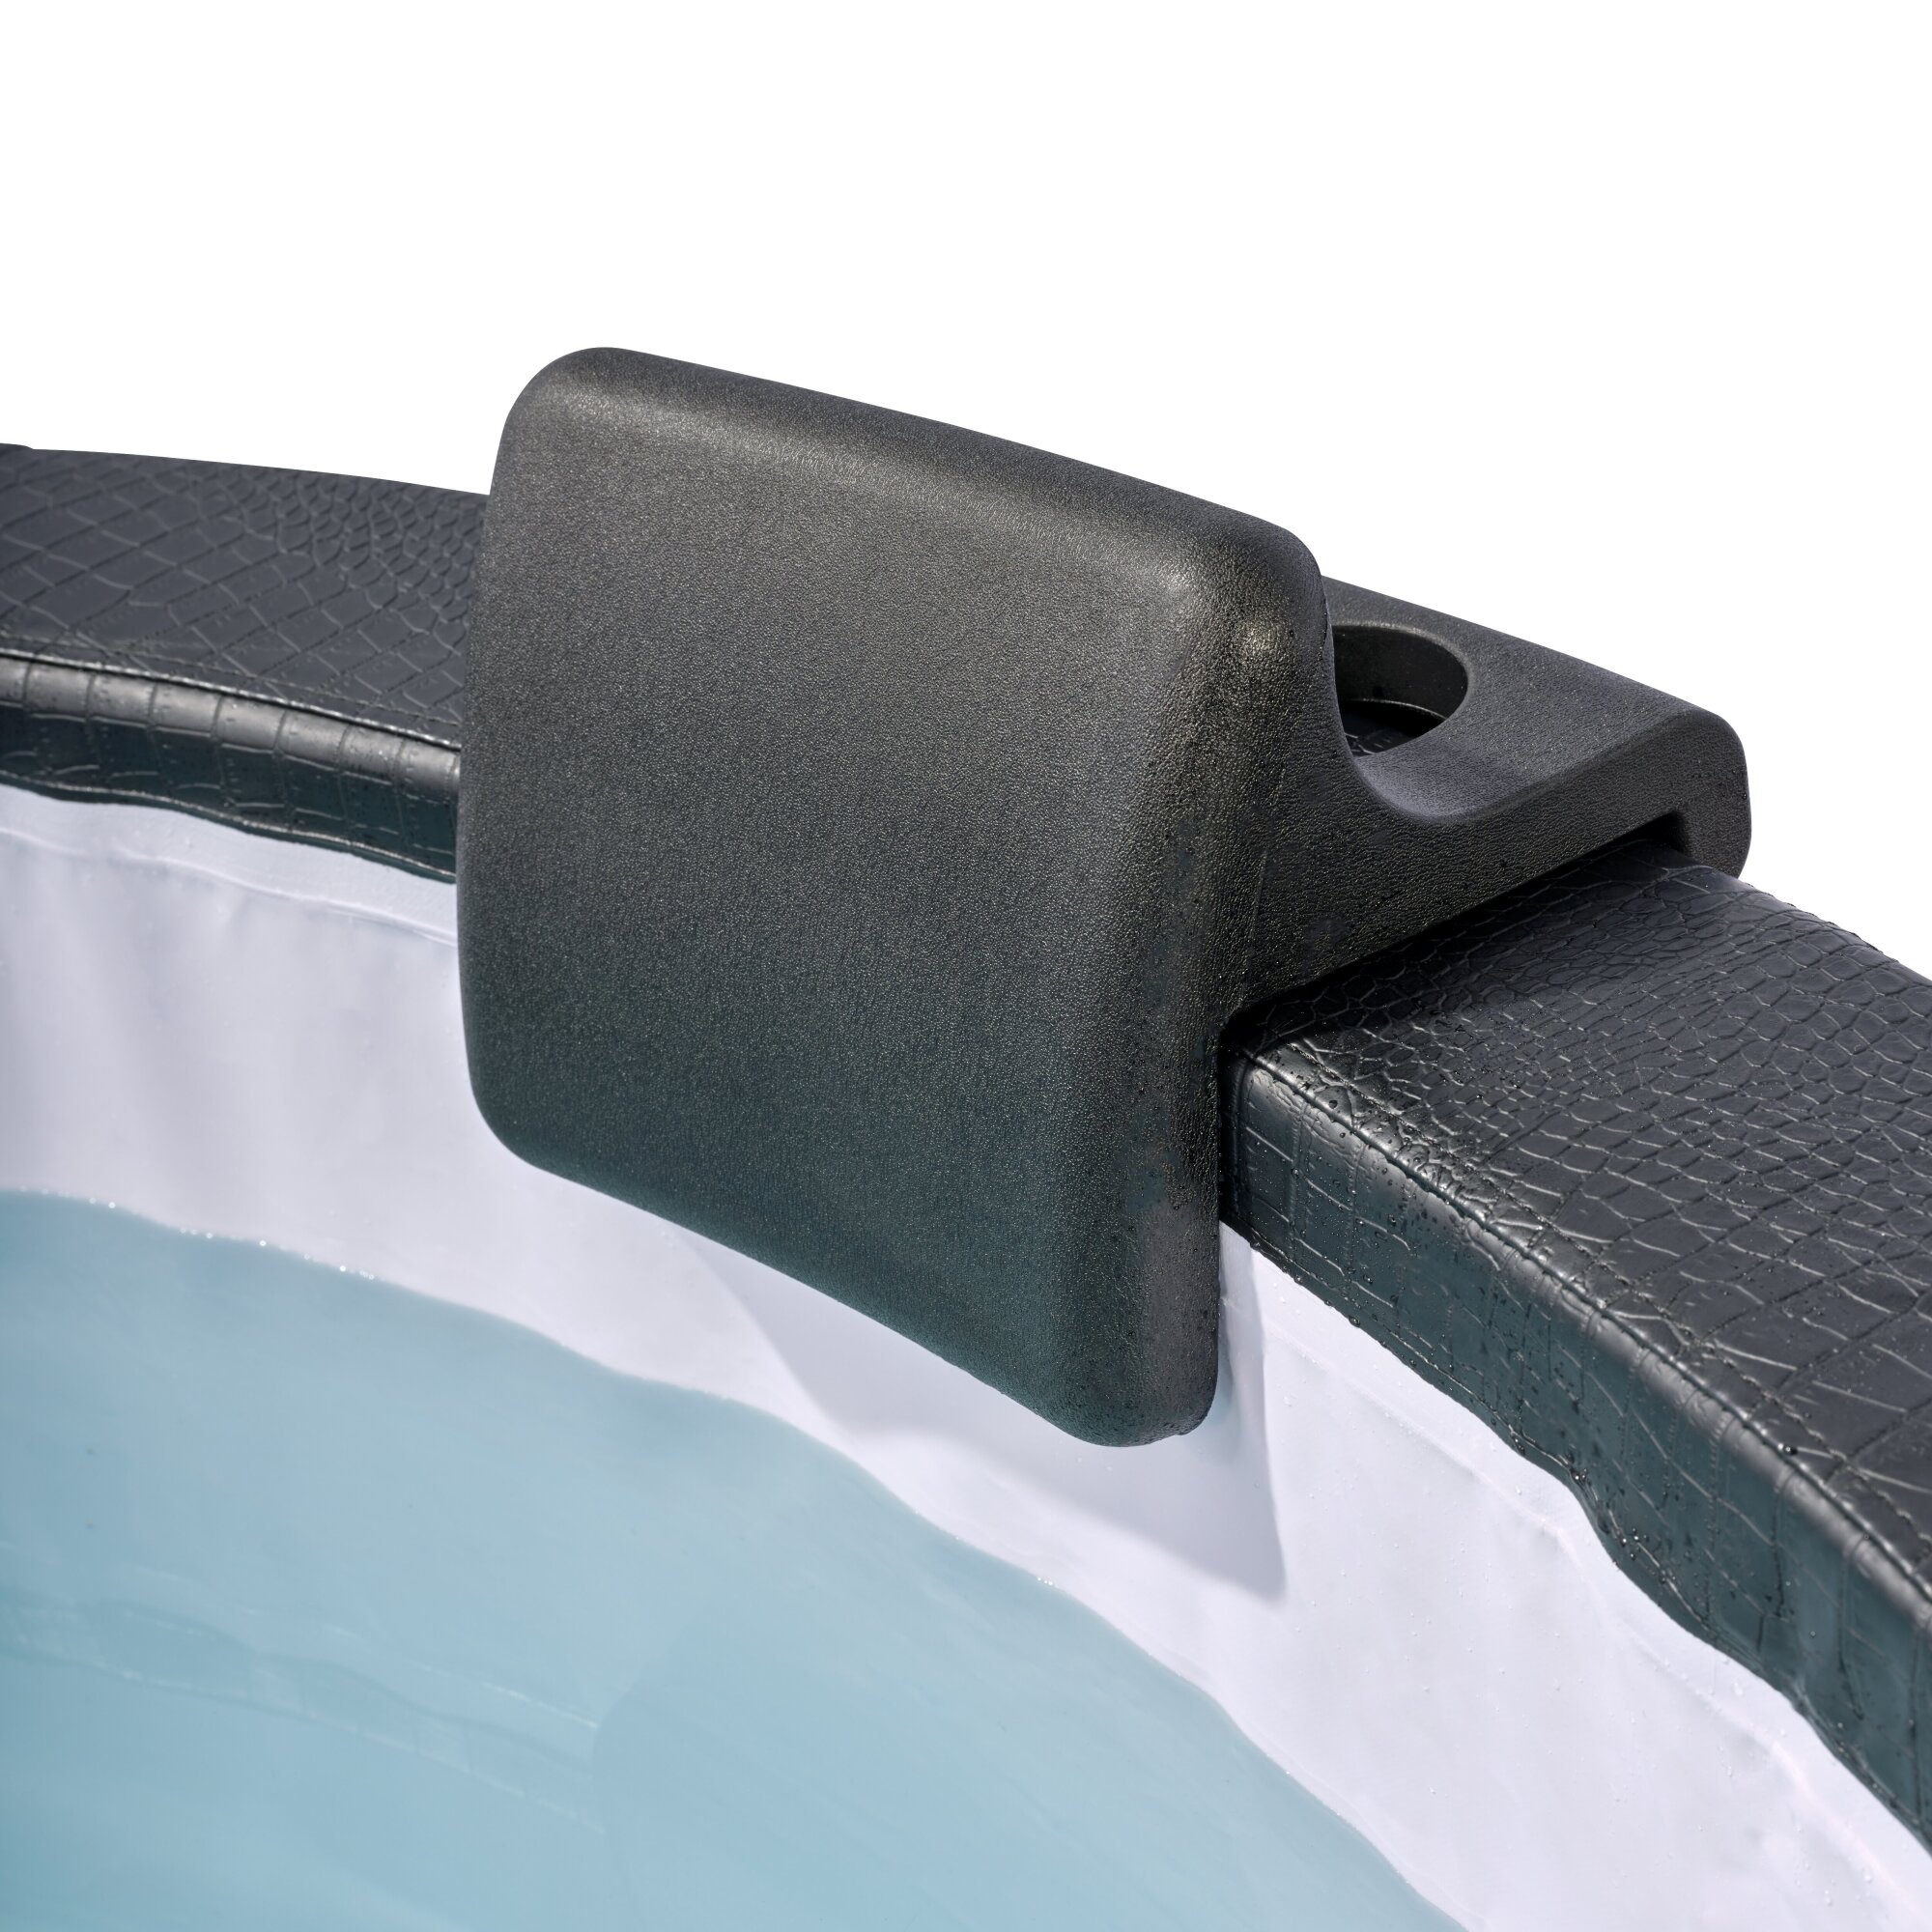 Head rest and cup holder set for the Leather Premium spa